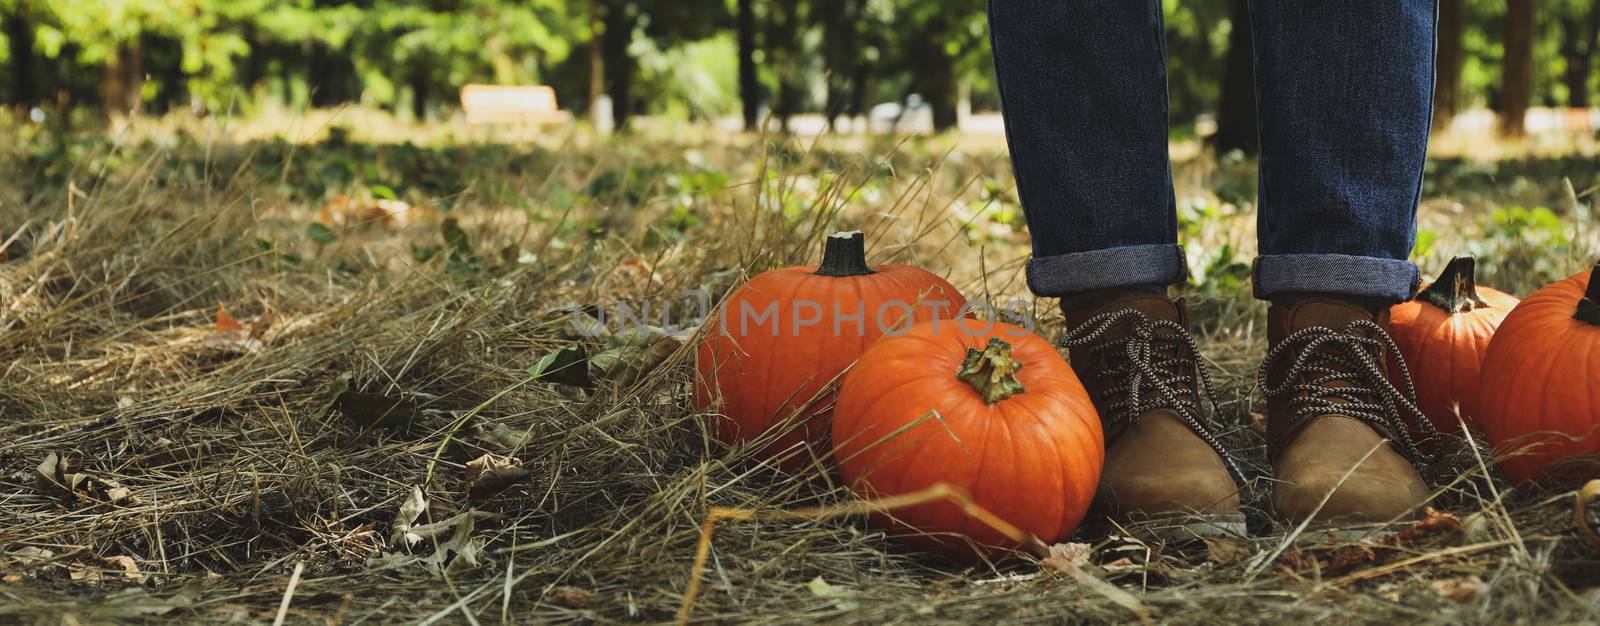 Autumn concept with pumpkins and woman in jeans and boots